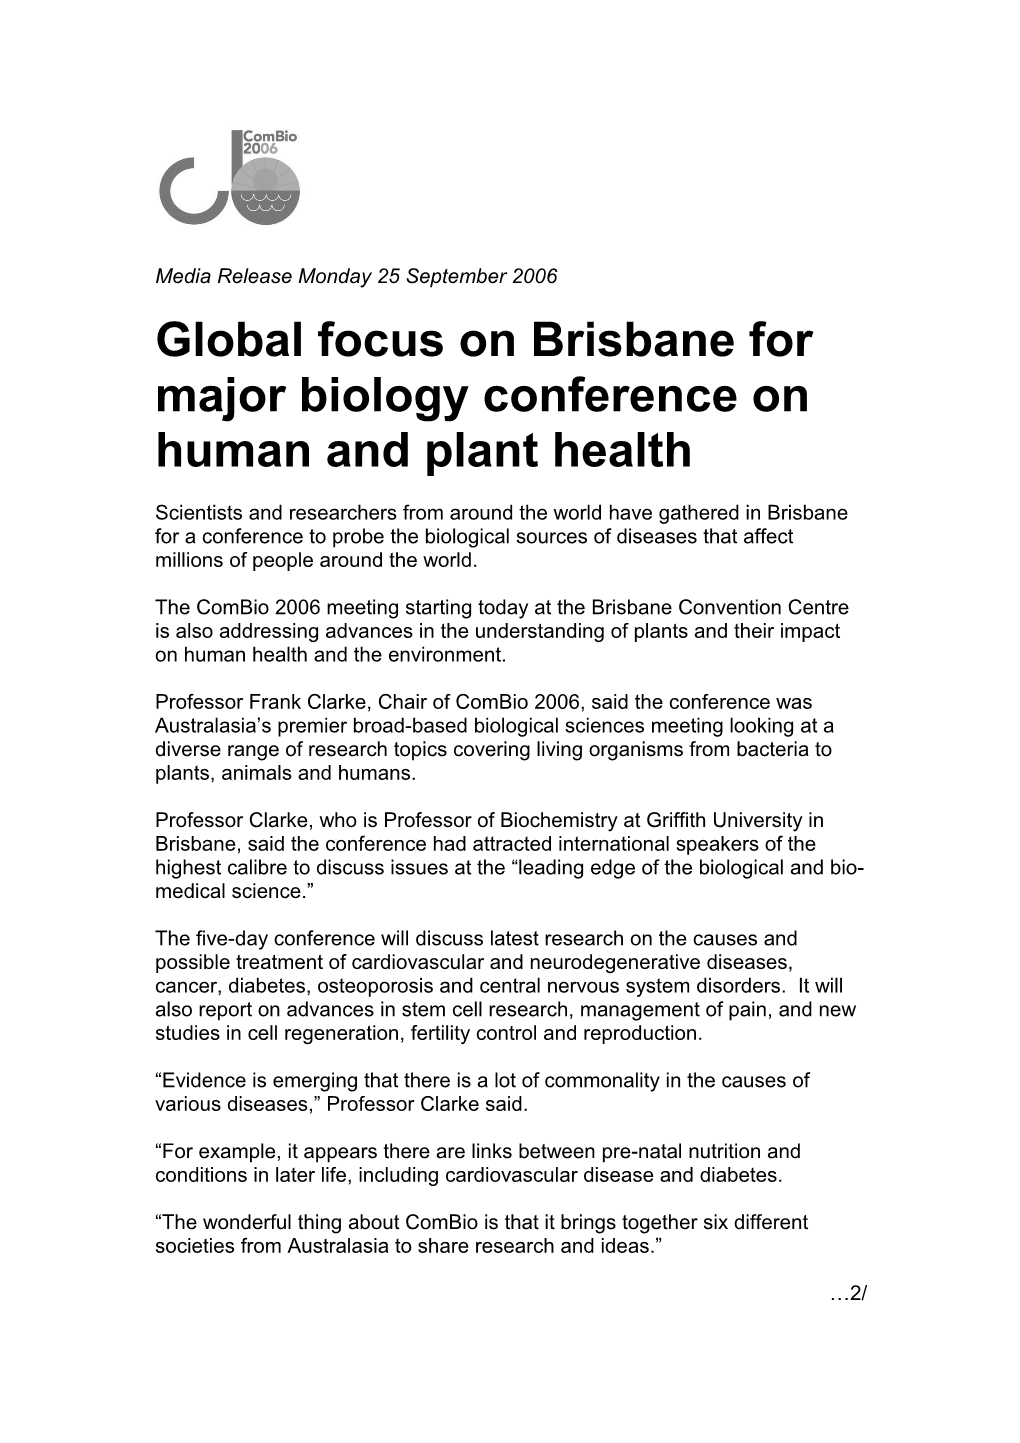 Global Focus on Brisbane for Major Biology Conference on Human and Plant Health